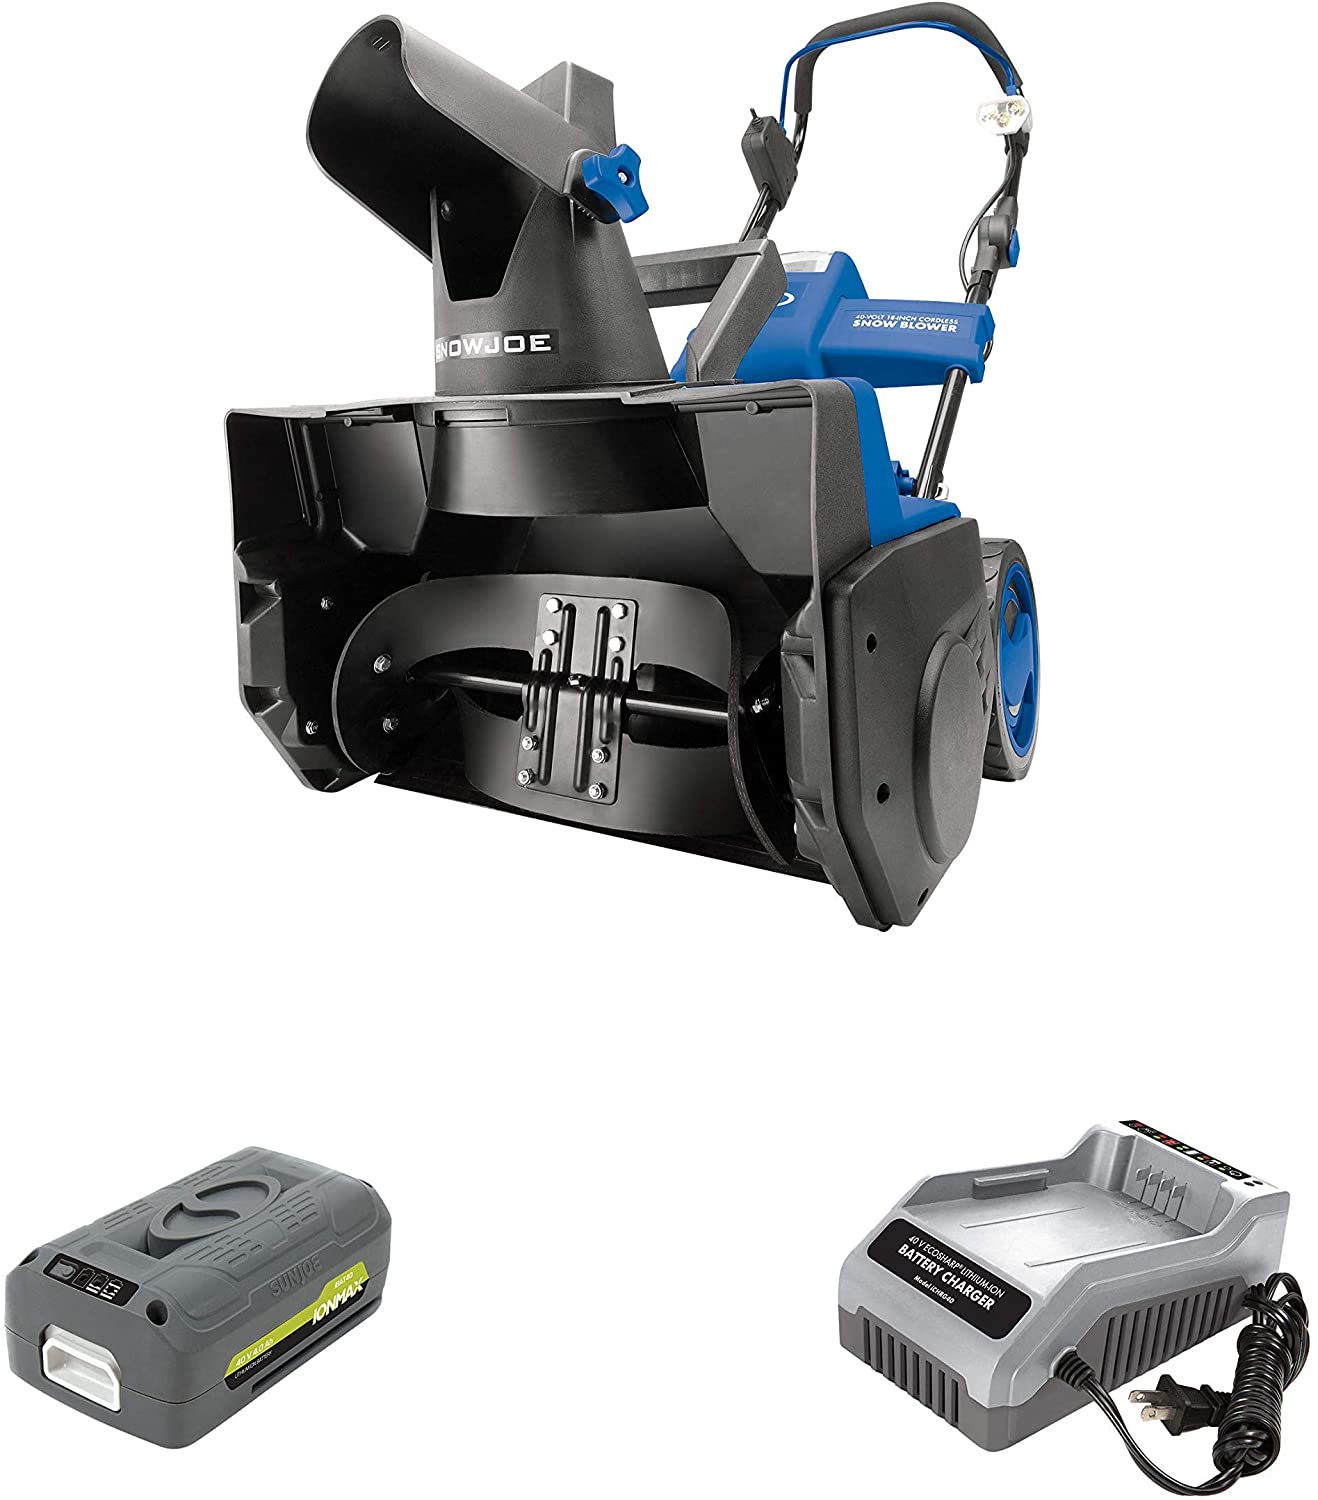 Snow Joe ION18SB 18-Inch 40 Volt Cordless Single Stage Brushless Snow Blower w/ 4Ah Battery $199 + free s/h at Amazon